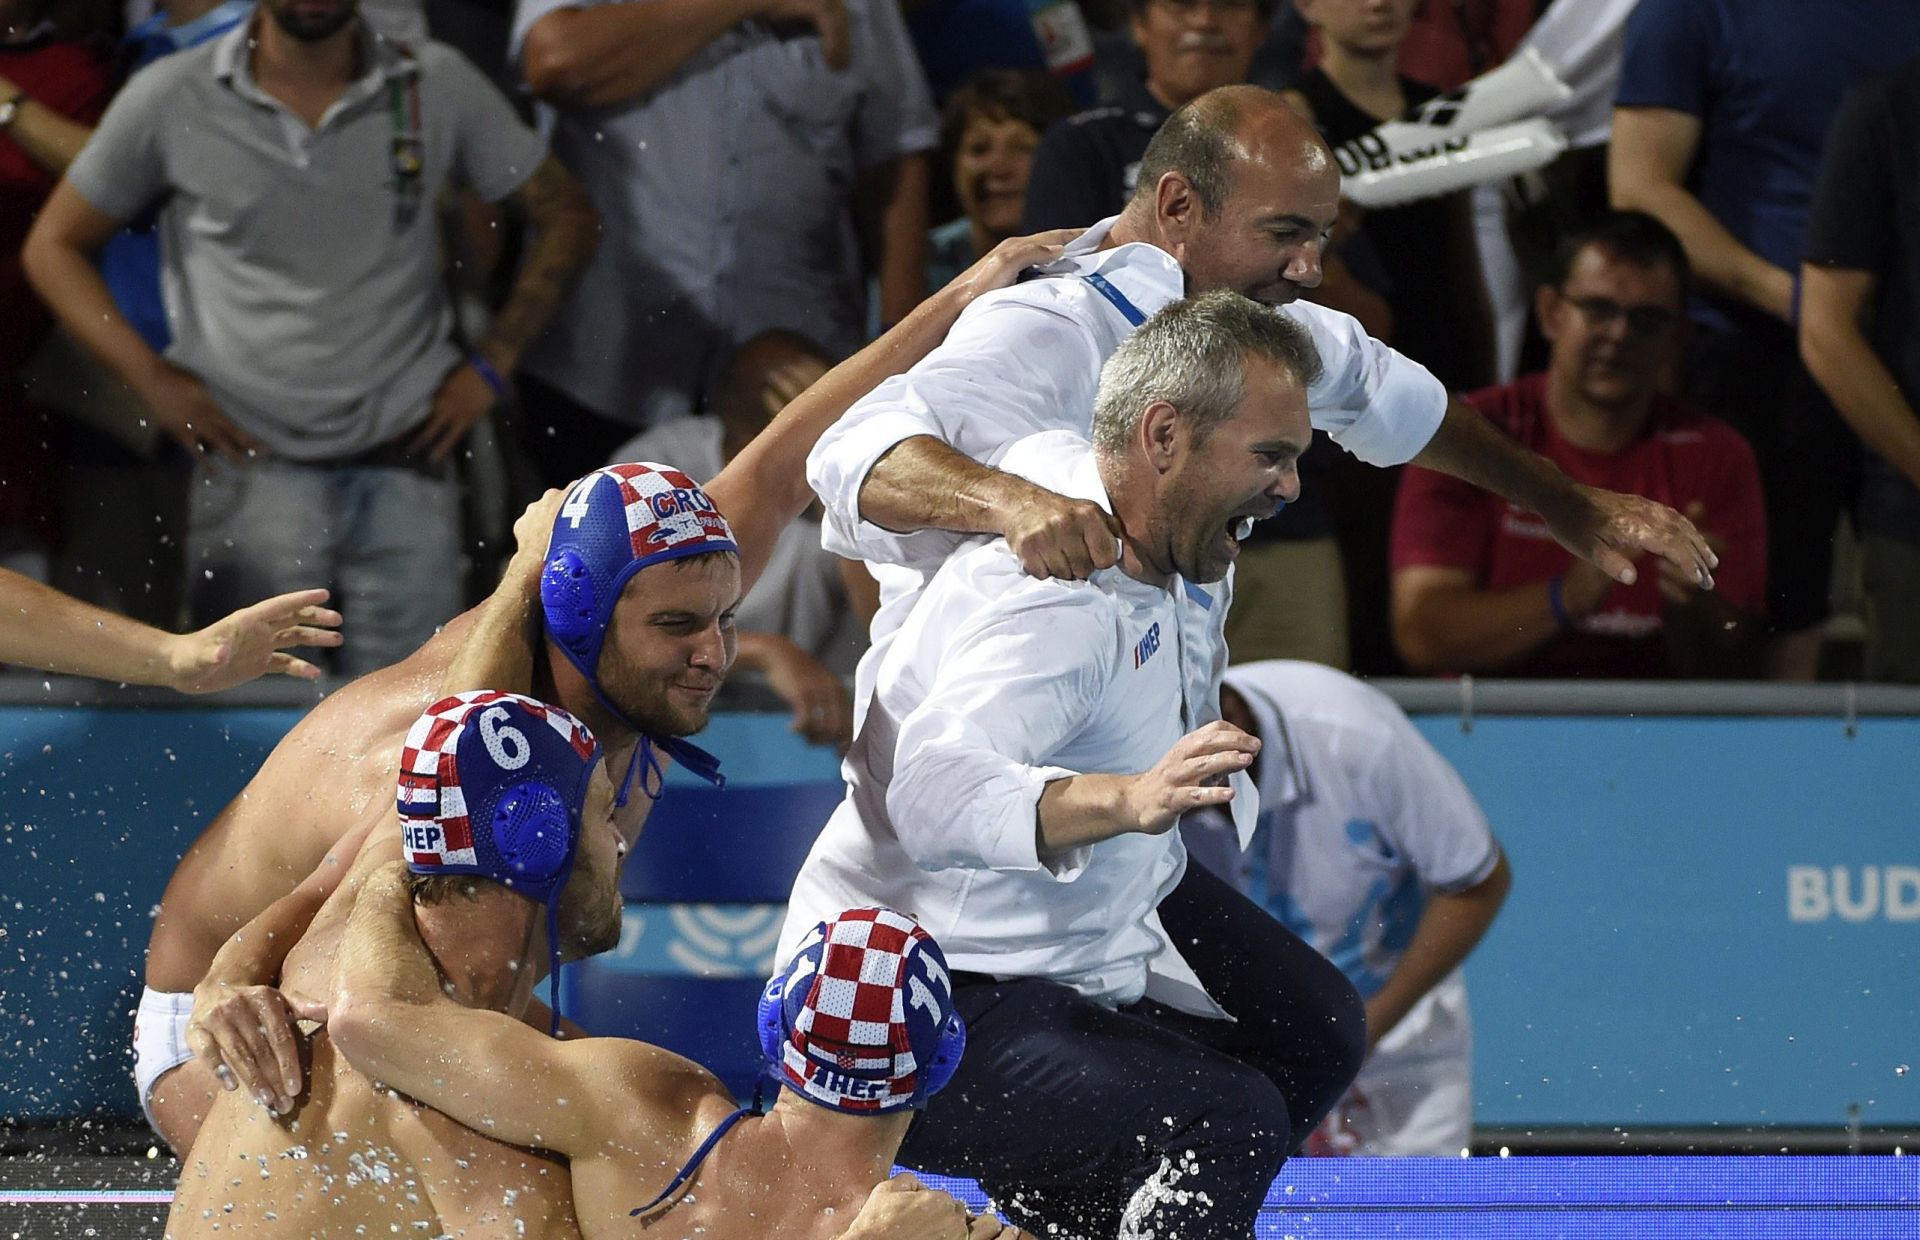 epa06116776 Head coach Ivica Tucak (rear) of Croatia jumps into the water to celebrate with his players after his team won the men's water polo final match Hungary vs Croatia at the 17th FINA Swimming World Championships in Hajos Alfred National Swimming Pool in Budapest, Hungary, 29 July 2017.  EPA/Balazs Czagany HUNGARY OUT